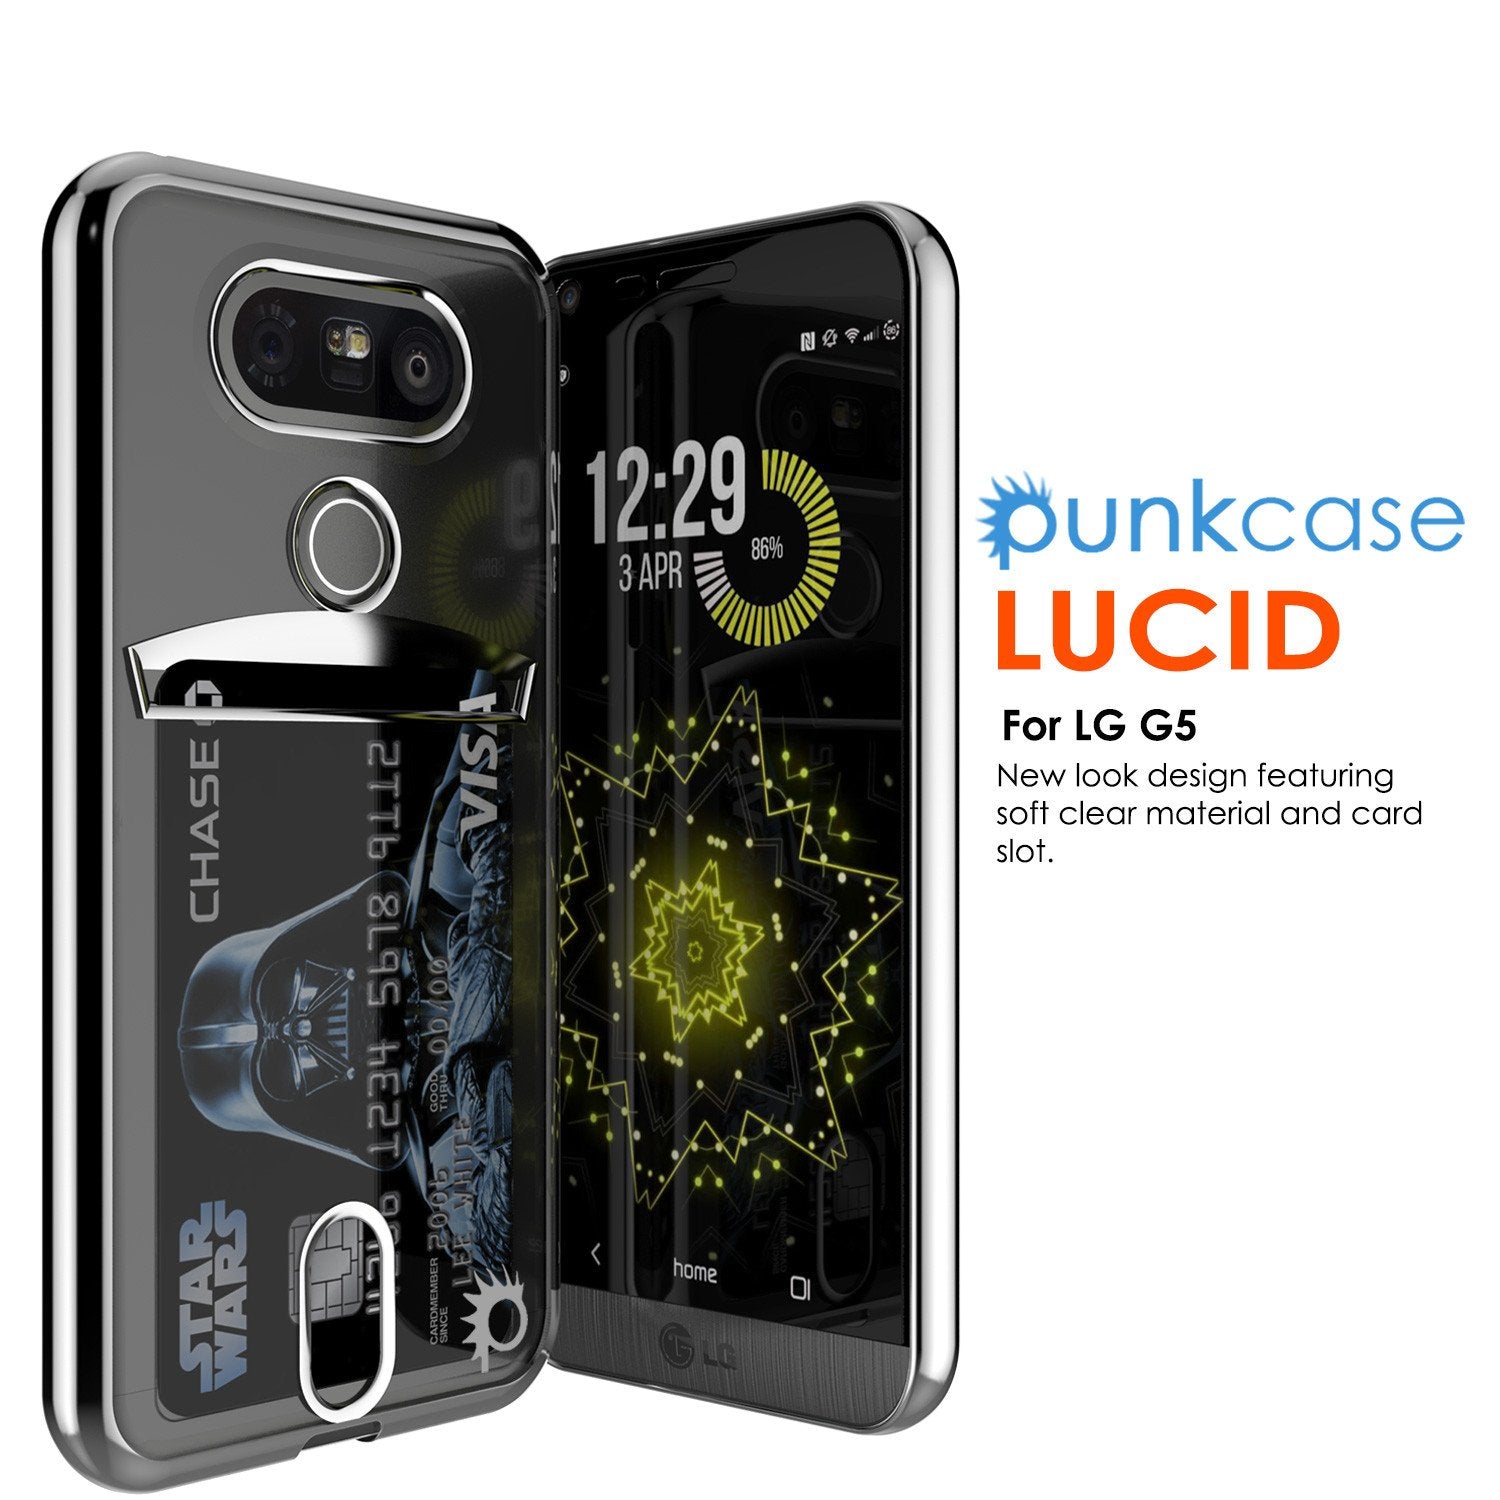 LG G5 Case, PUNKCASE® Silver LUCID  Series | Card Slot | PUNK SHIELD Screen Protector | Ultra Fit